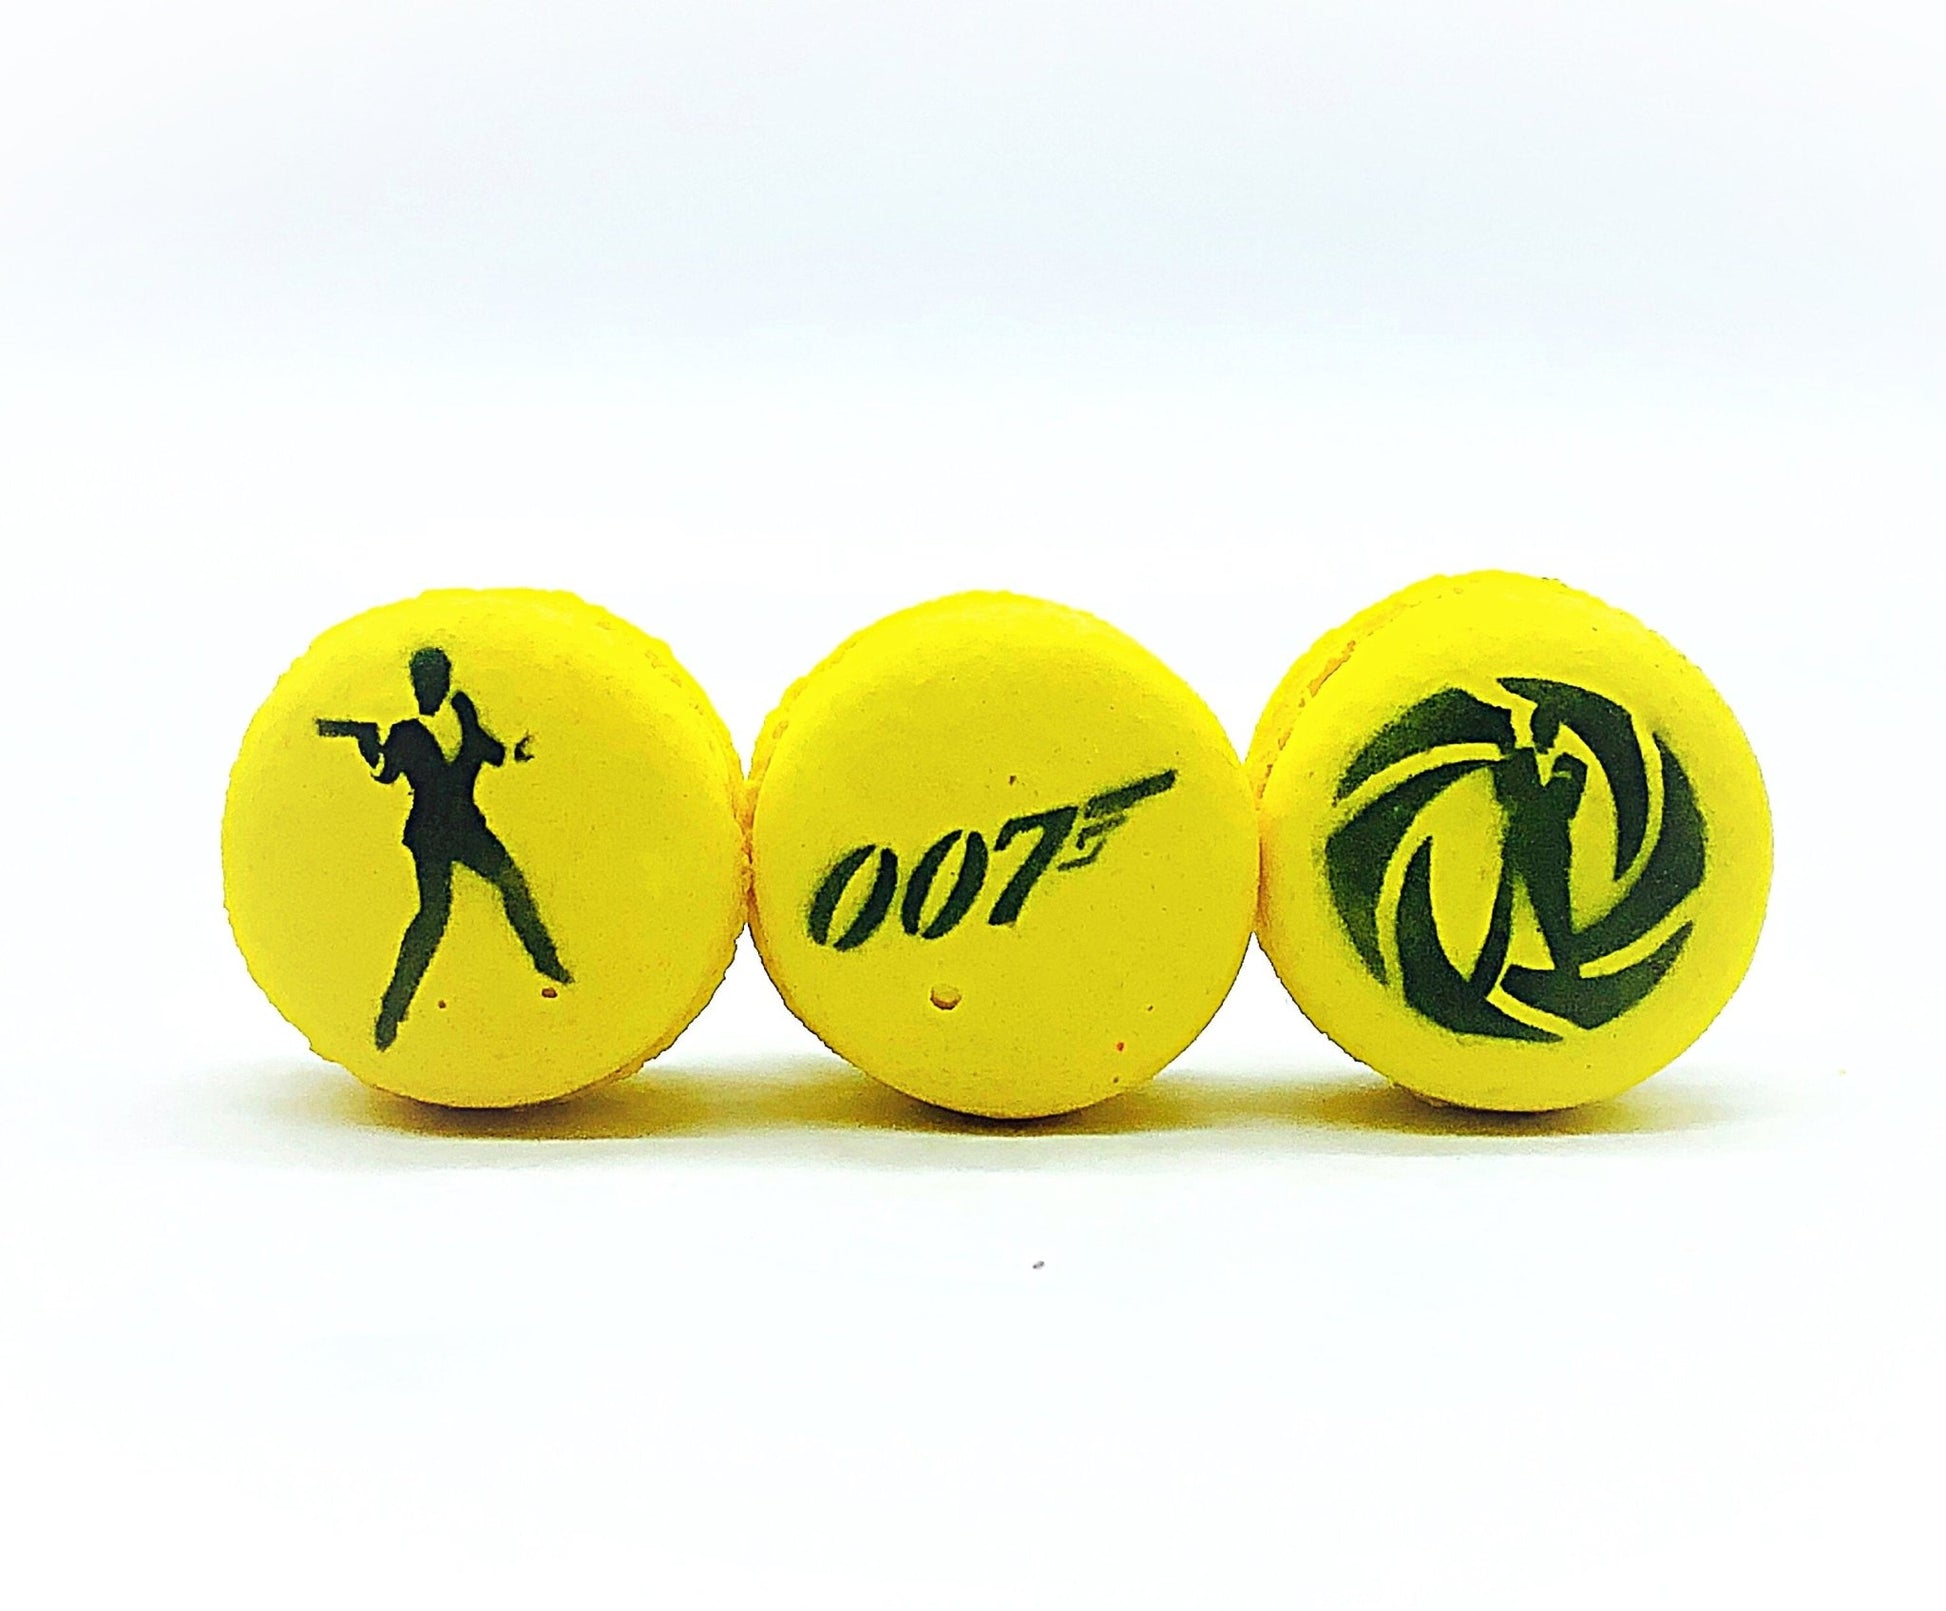 French Macaron Tribute to James Bond Movie | Available in 6 or 12 Pack - Macaron Centrale6 pack